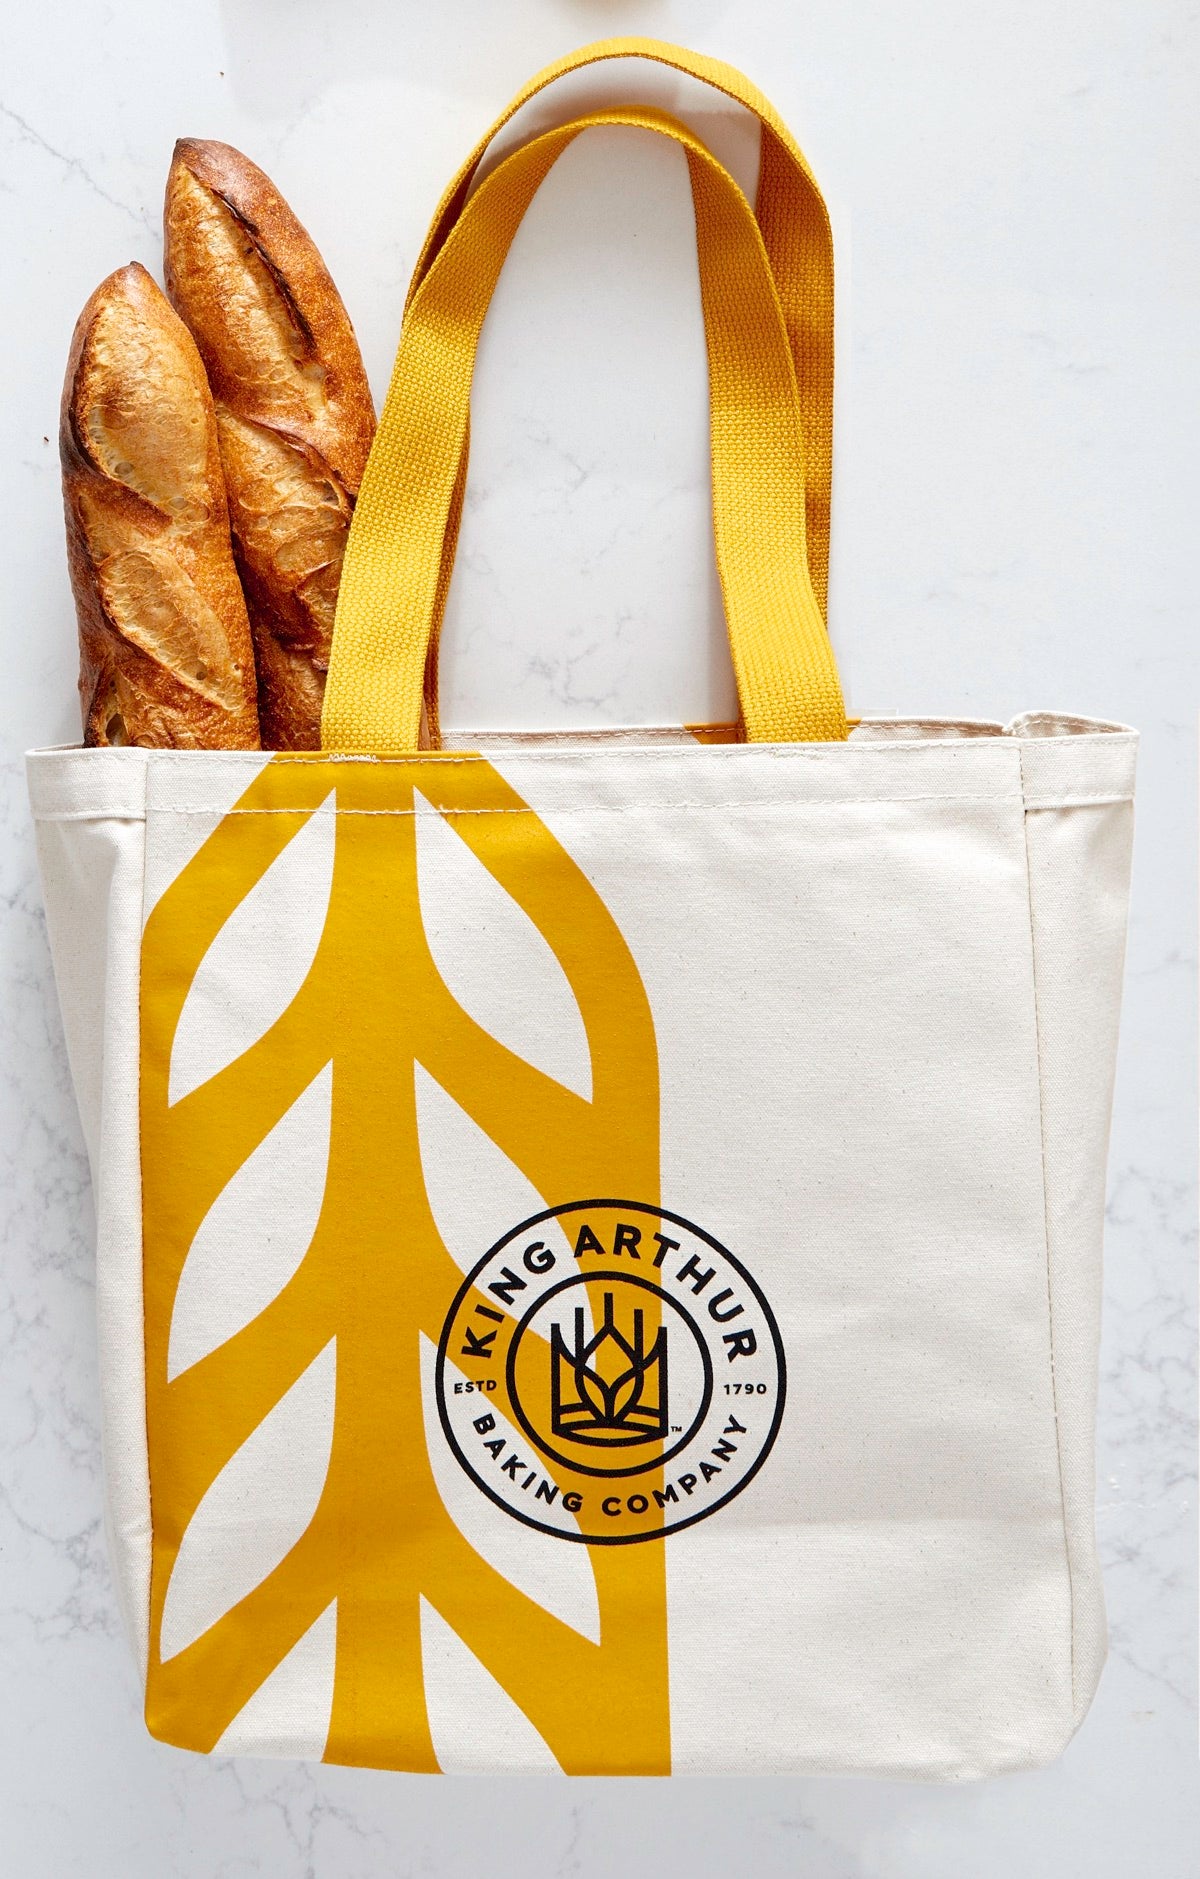 King Arthur Baking Company tote bag with two baguettes.